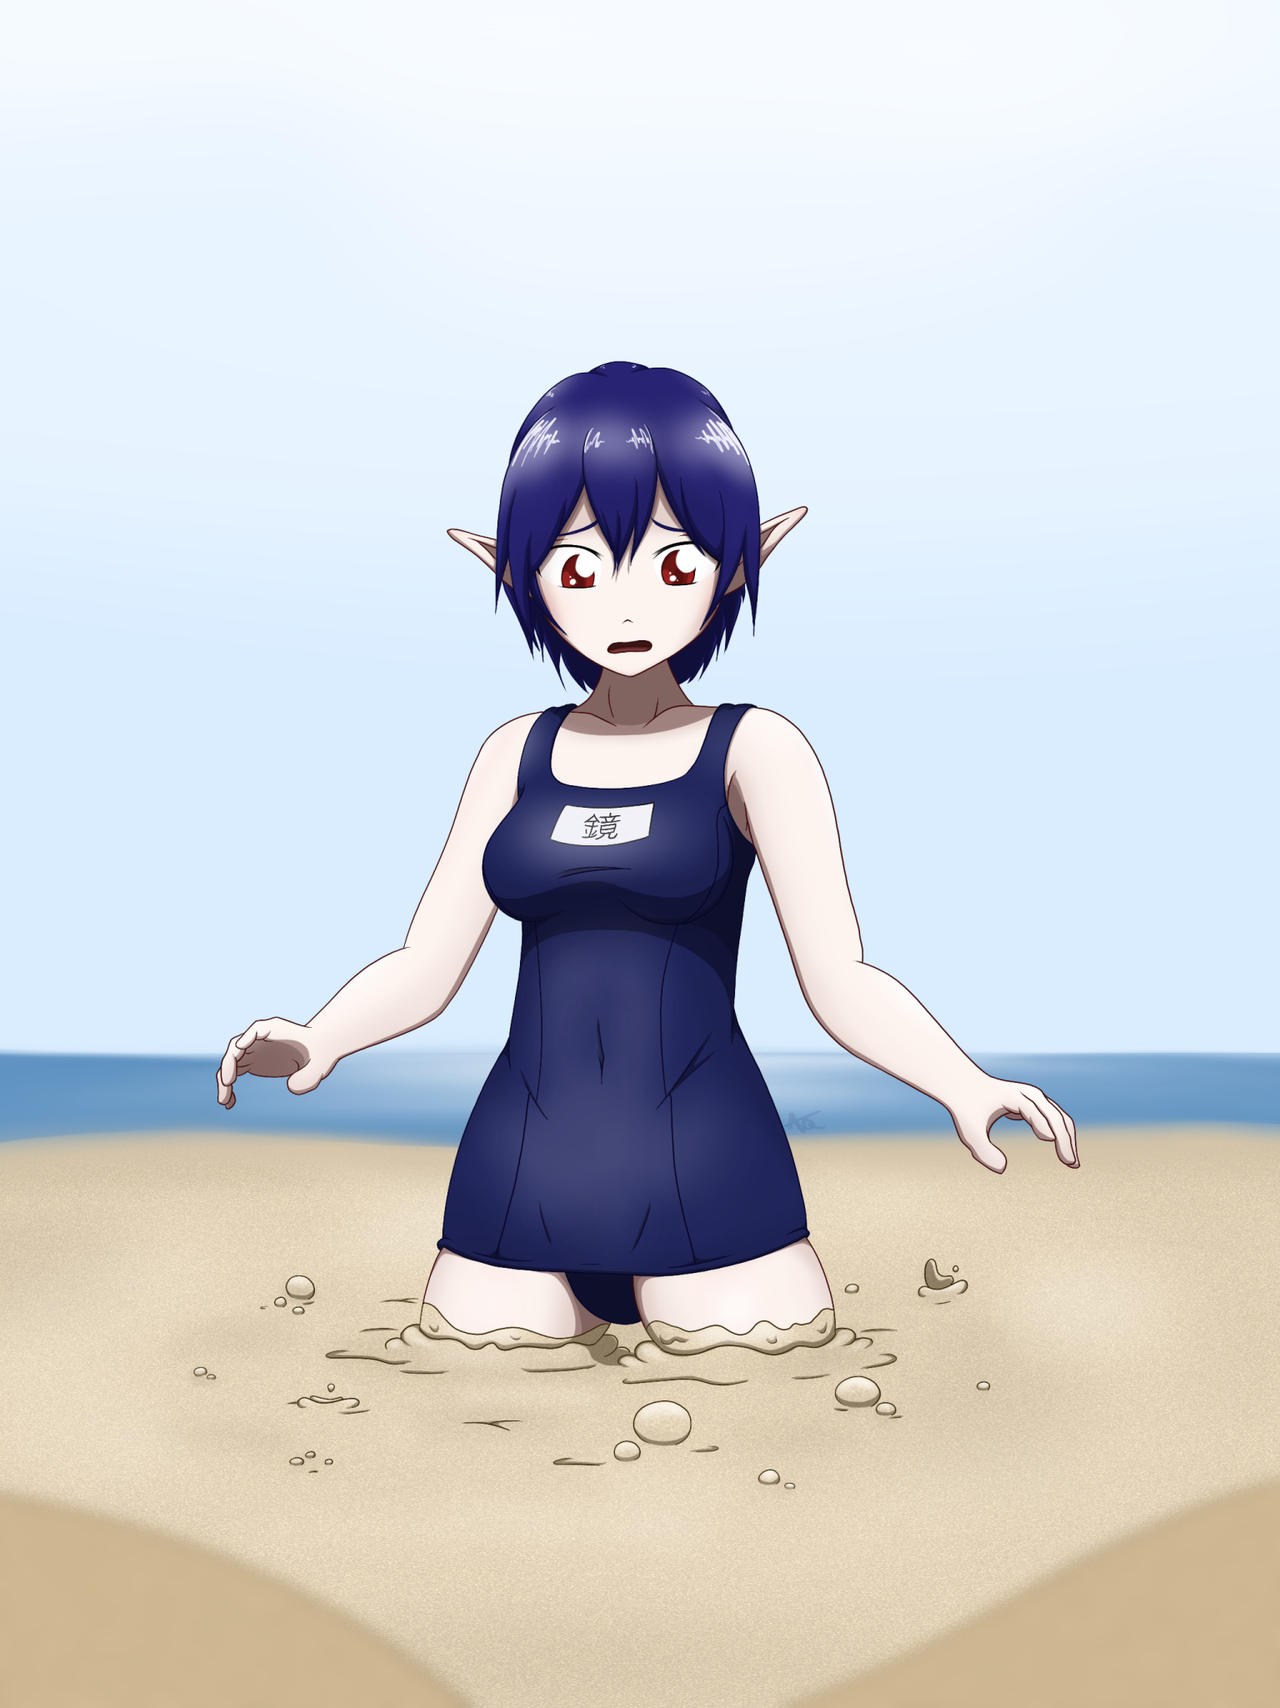 Kagami's Beach Blunder by AnonymousQuote on DeviantArt